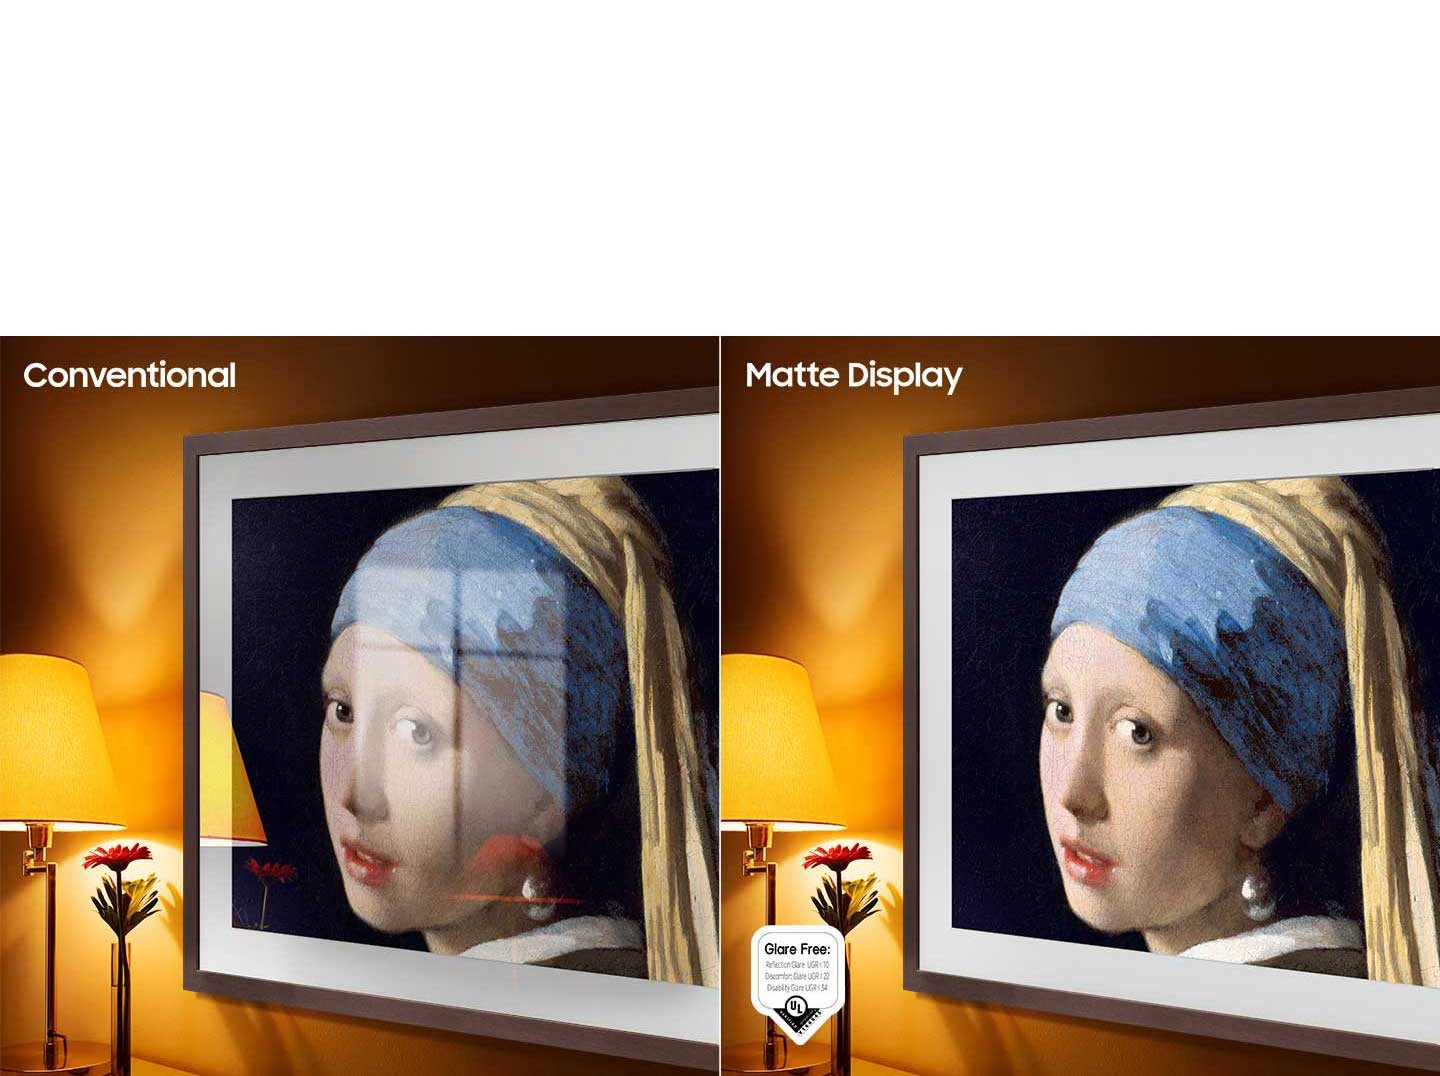 The Conventional screen displays artwork full of reflections. The Matte Display shows the same painting with no glare. The UL verified Glare Free logo is on display with Reflection Glare UGR<10, Discomfort Glare UGR<22, Disability Glare UGR<34.